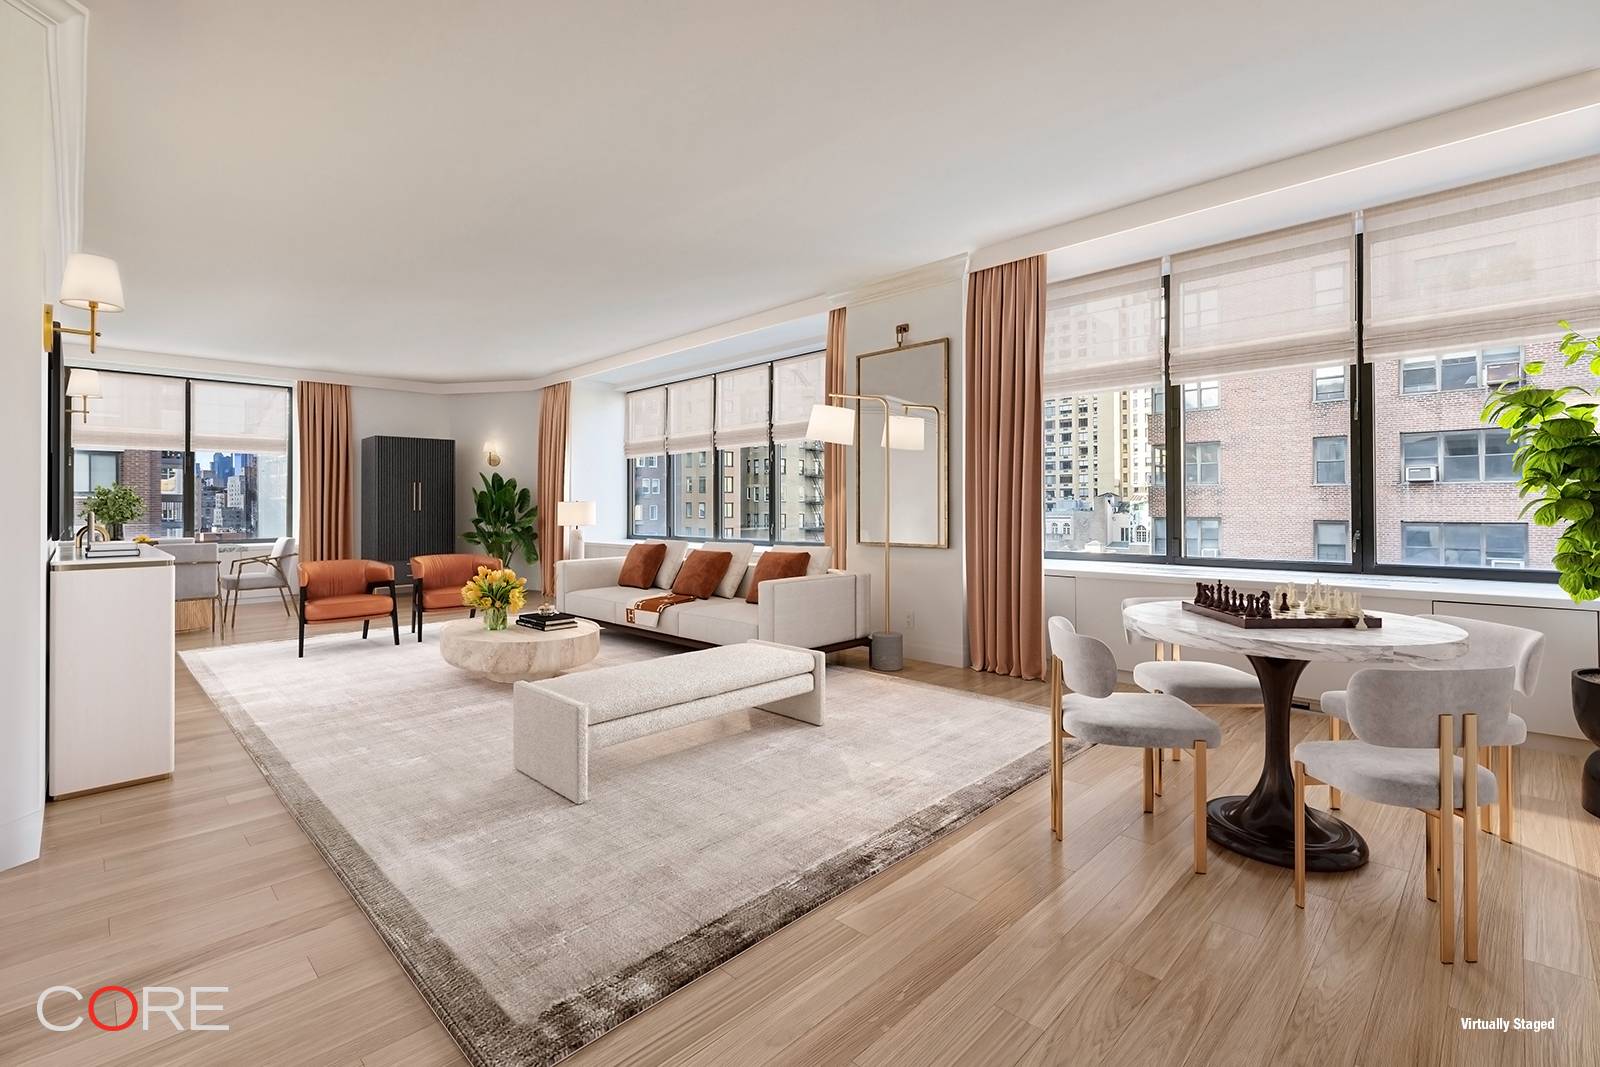 Conveniently nestled in one of Manhattan s most coveted neighborhoods, 45 East 80th Street, Apartment 11B transports you to a sanctuary on the Upper East Side.